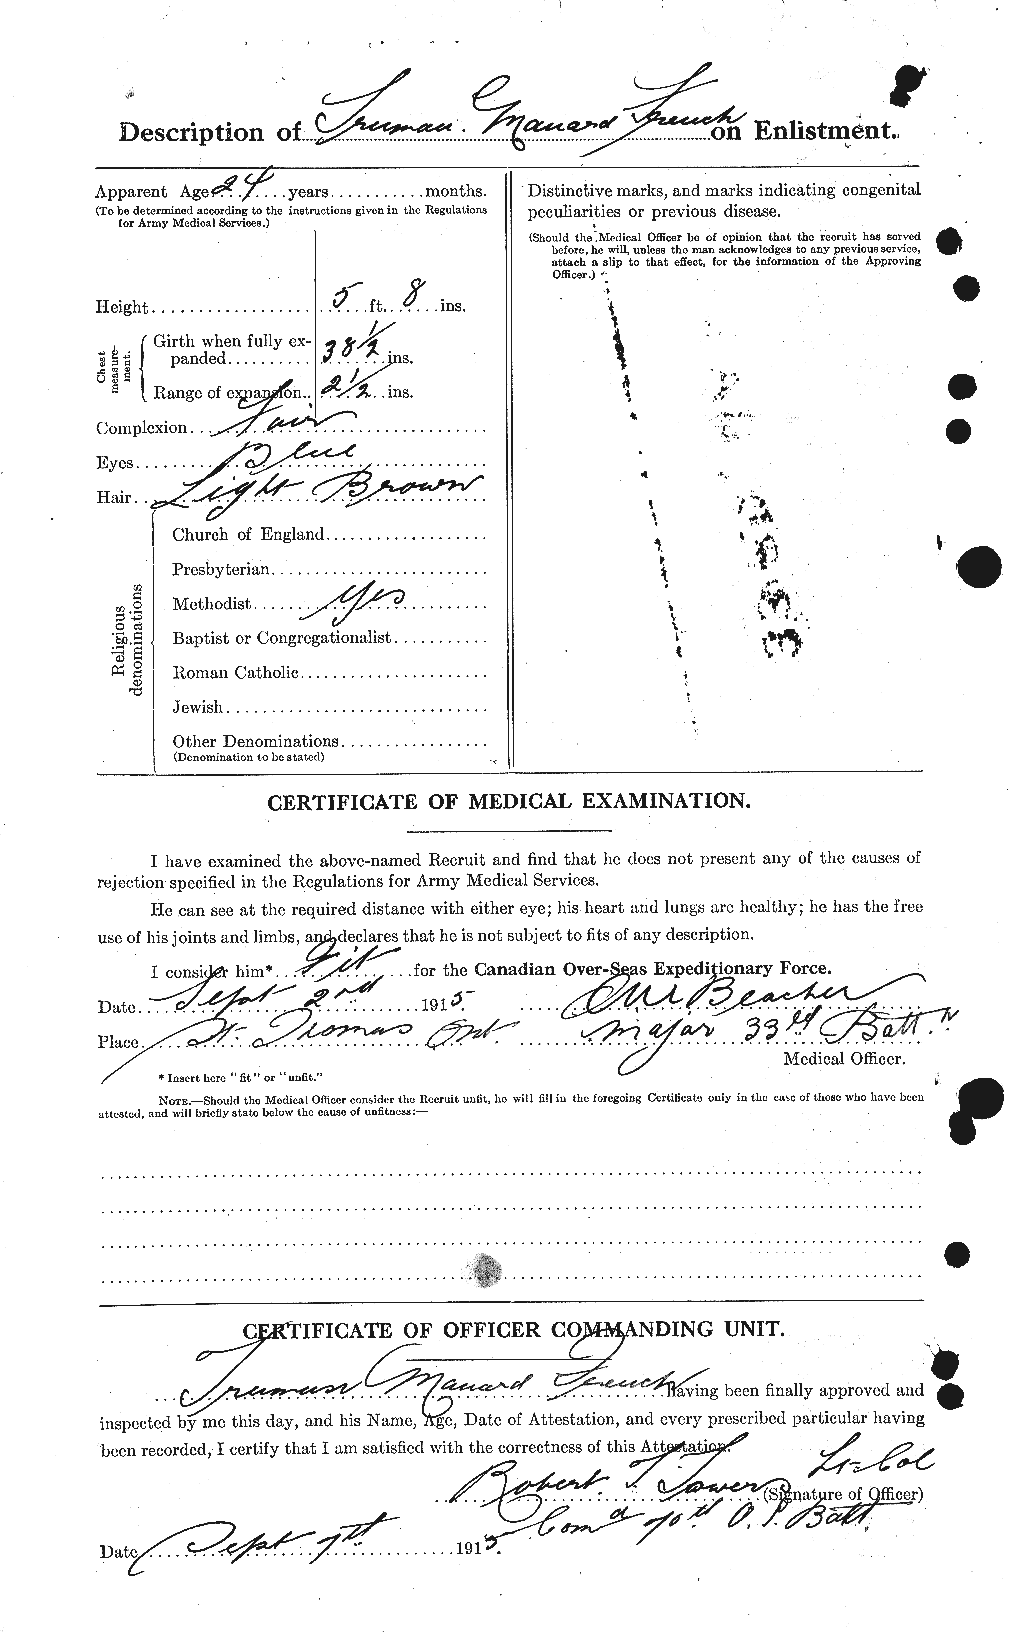 Personnel Records of the First World War - CEF 338243b